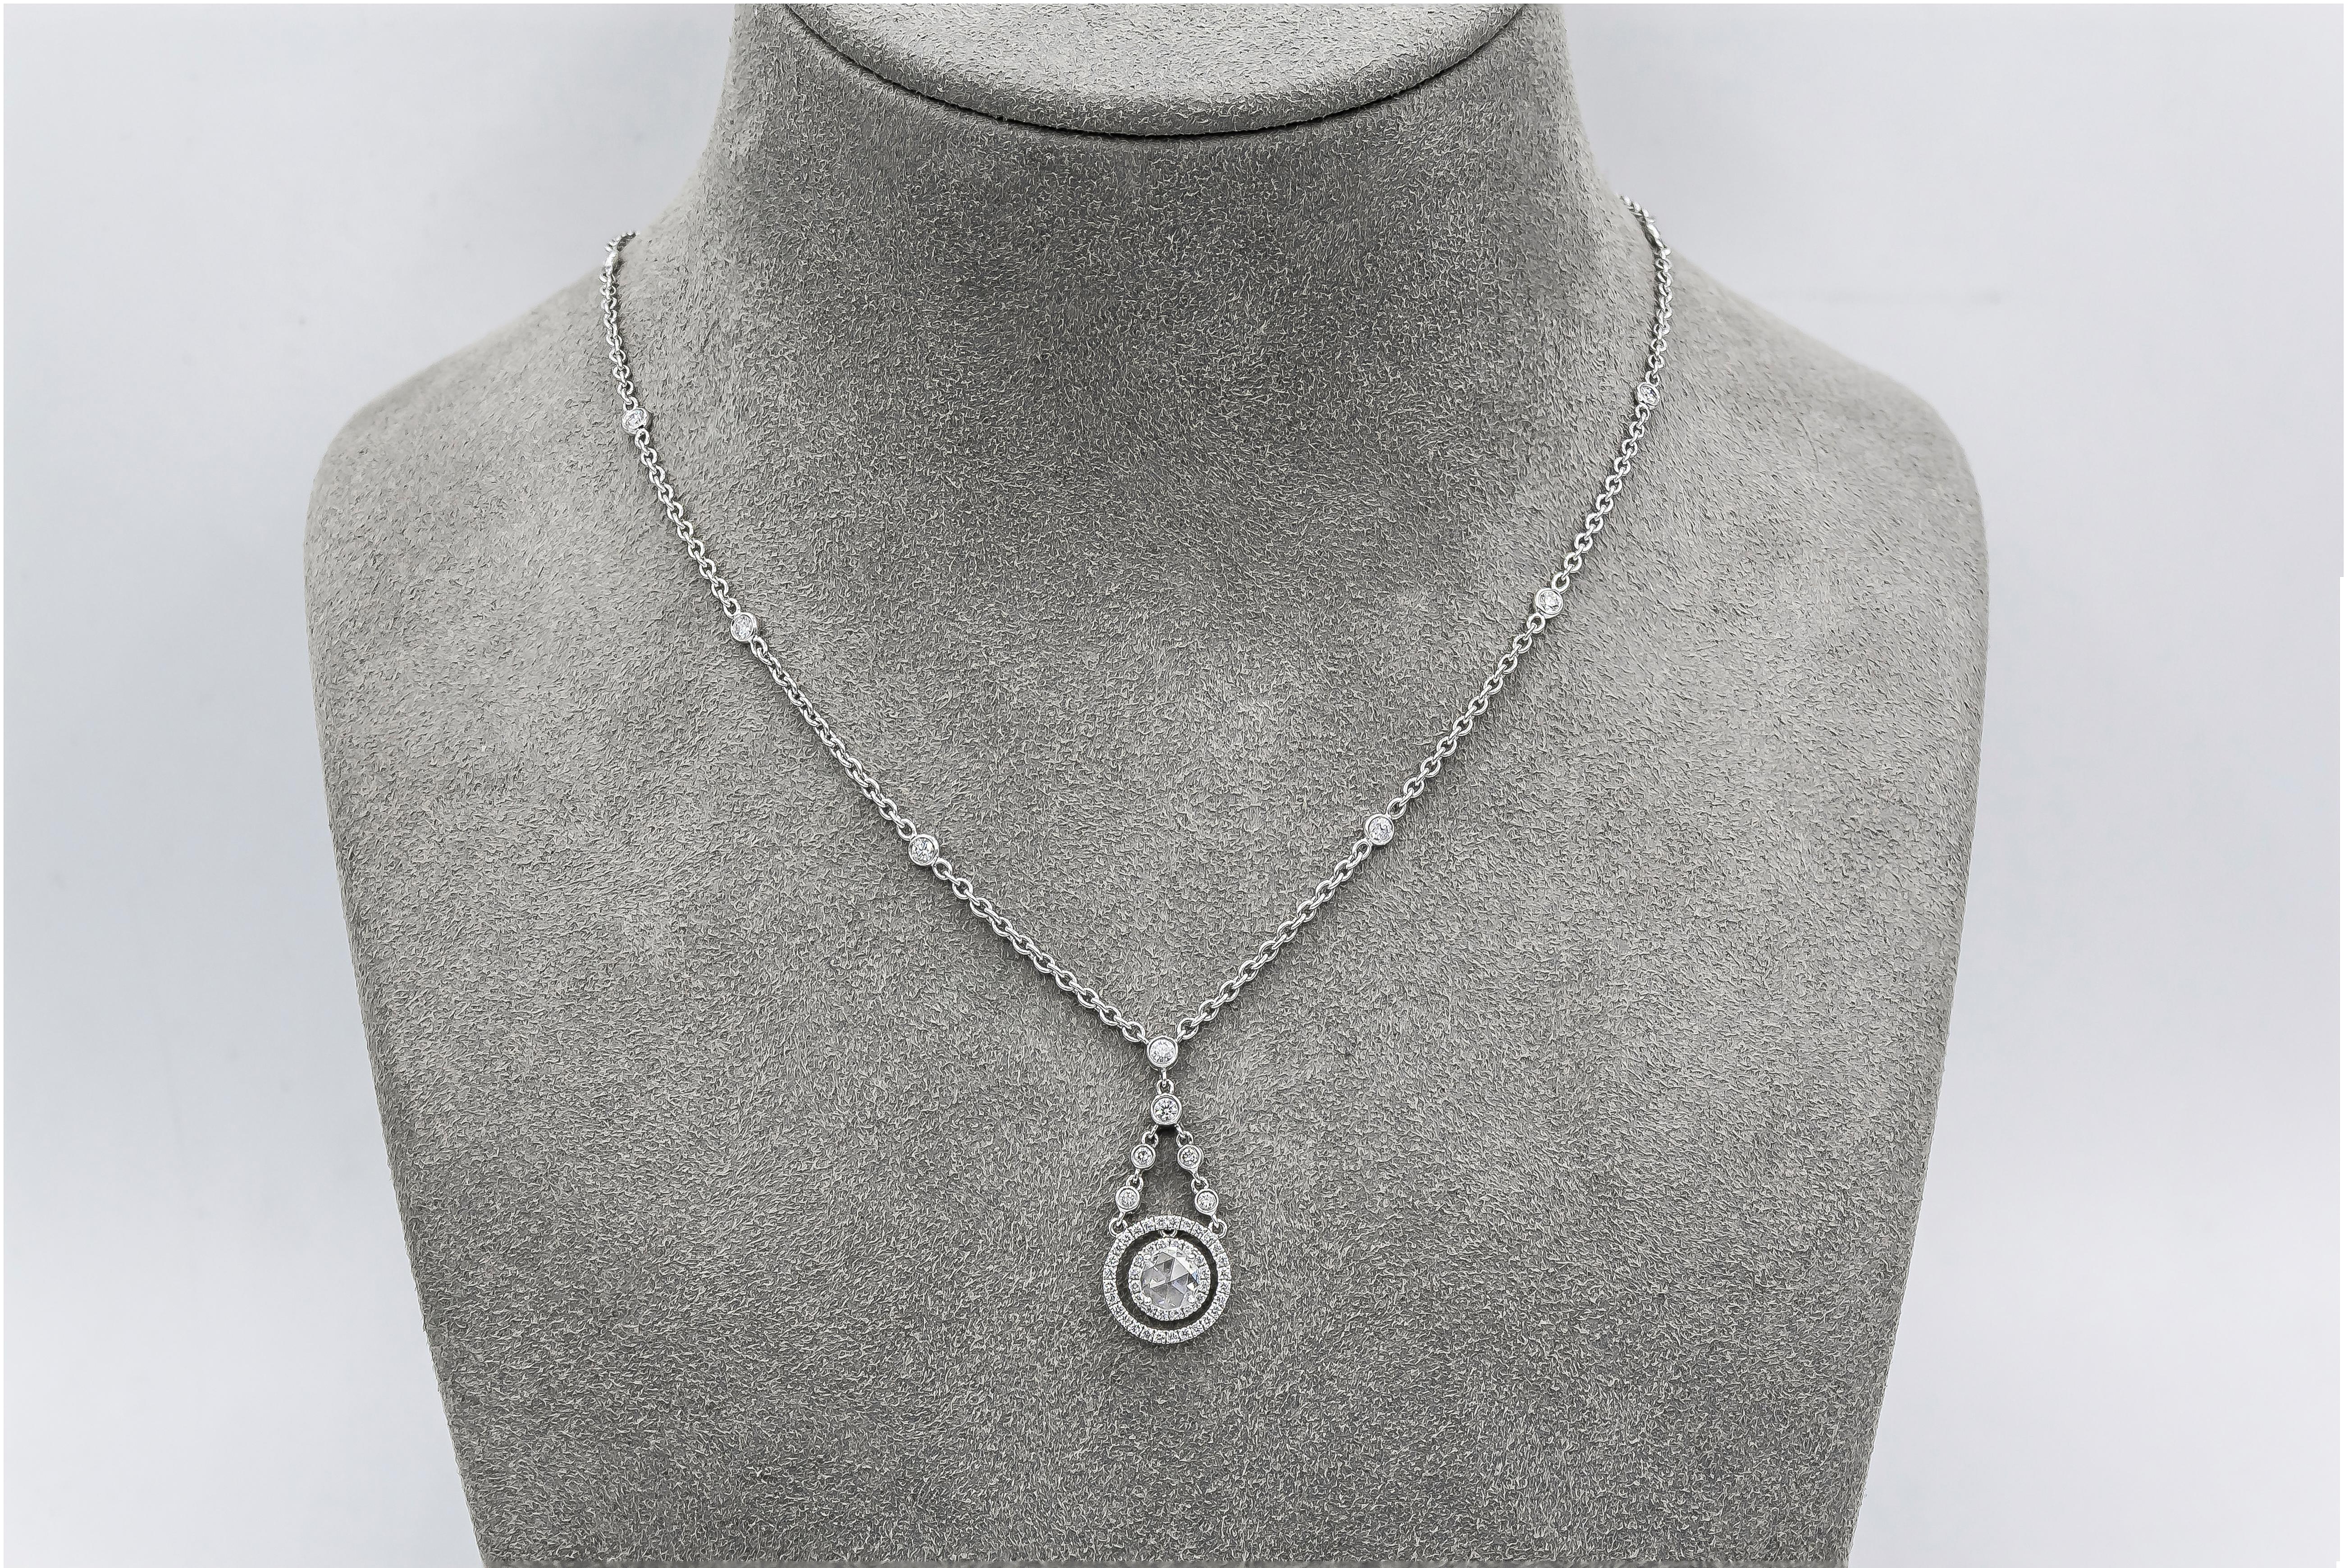 Showcases a single rose cut diamond weighing 0.33 carats, surrounded by two rows of round brilliant diamonds. Attached to a short diamonds by the yard chain that slowly comes together to the longer diamonds by the yard chain. Accent diamonds weigh